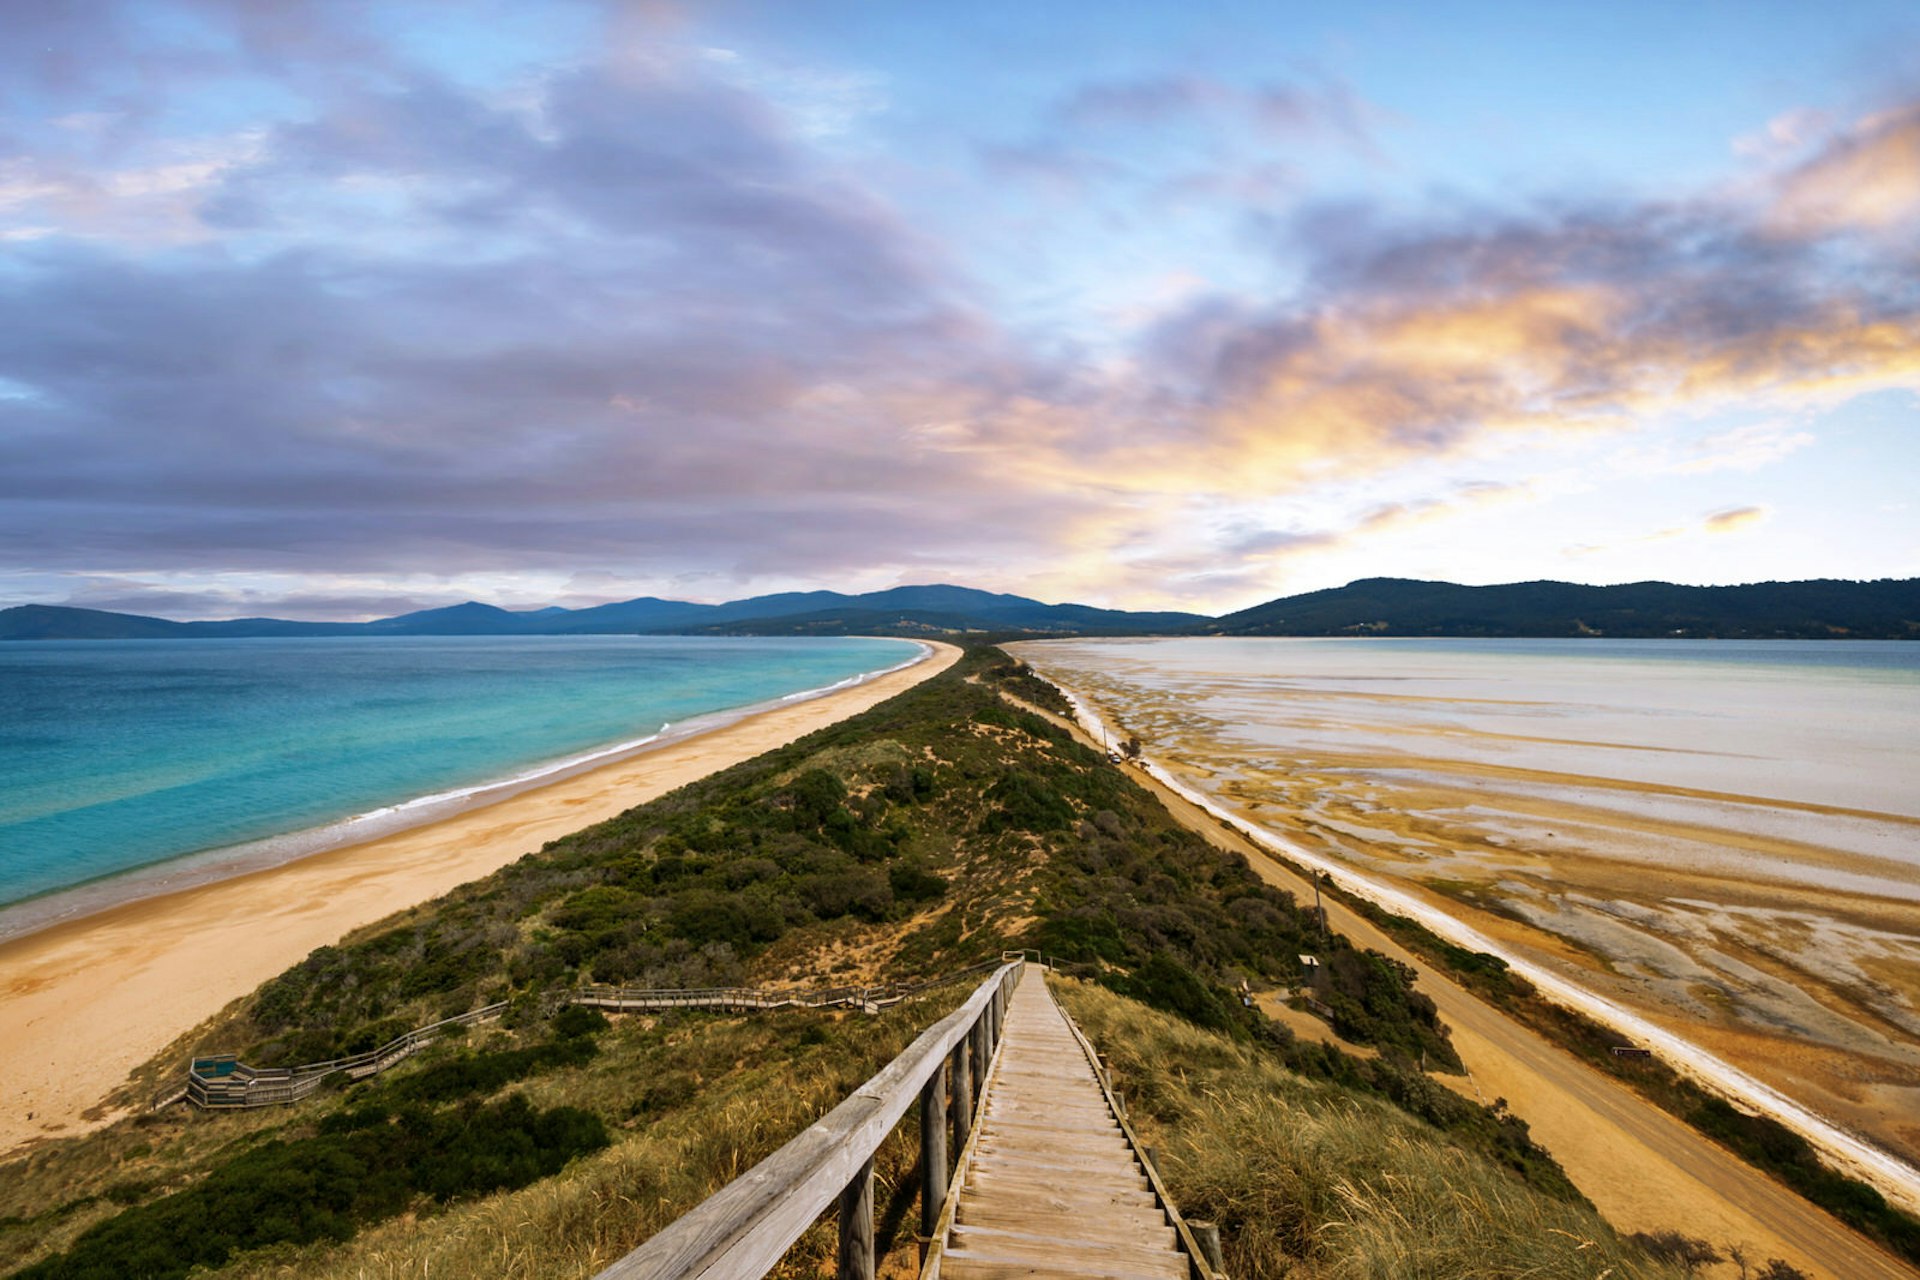 The Neck connects the two halves of Bruny Island separated by the D'Entrecasteaux Channel 